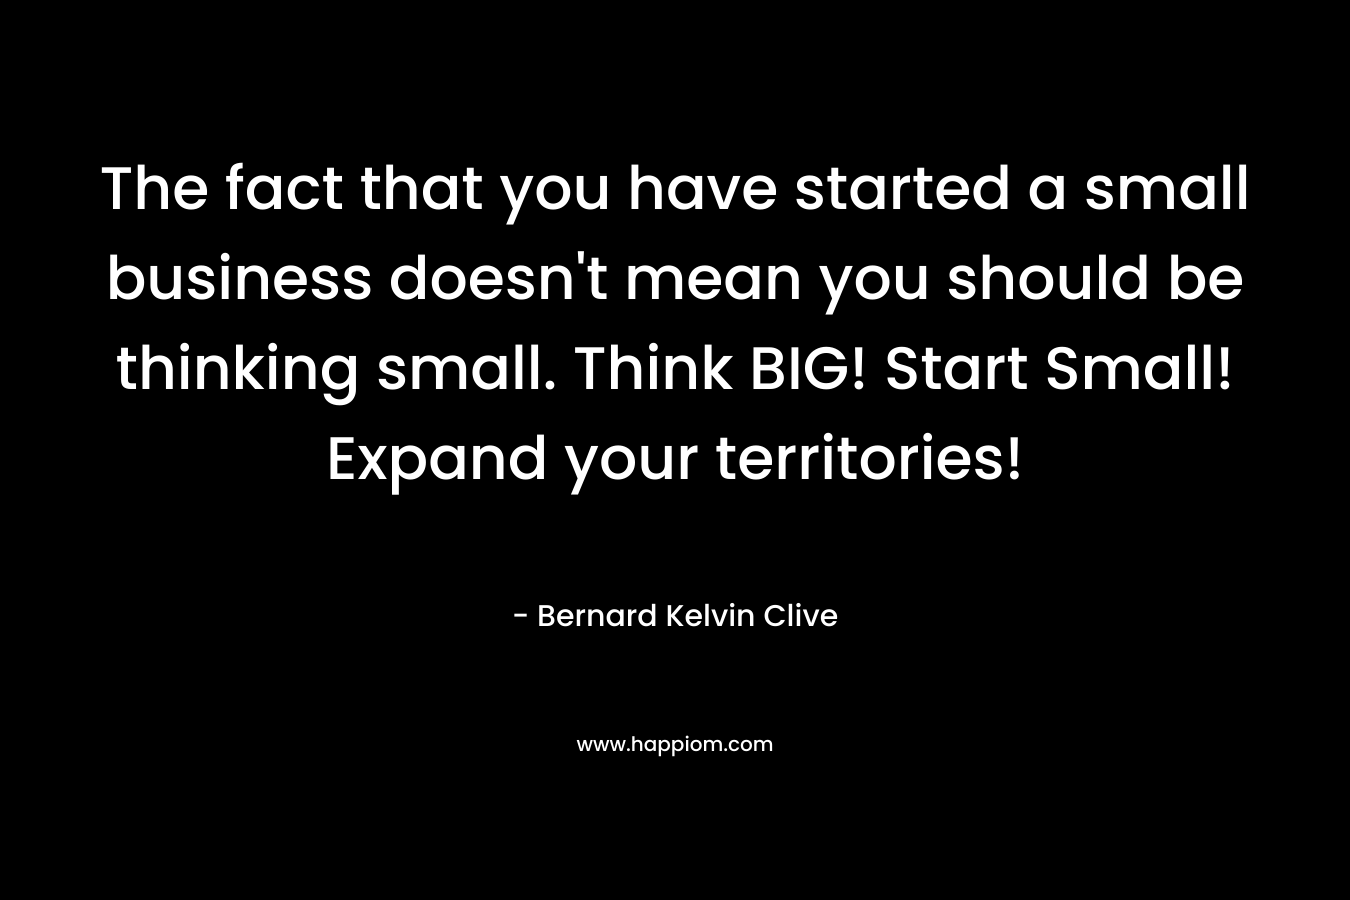 The fact that you have started a small business doesn’t mean you should be thinking small. Think BIG! Start Small! Expand your territories! – Bernard Kelvin Clive